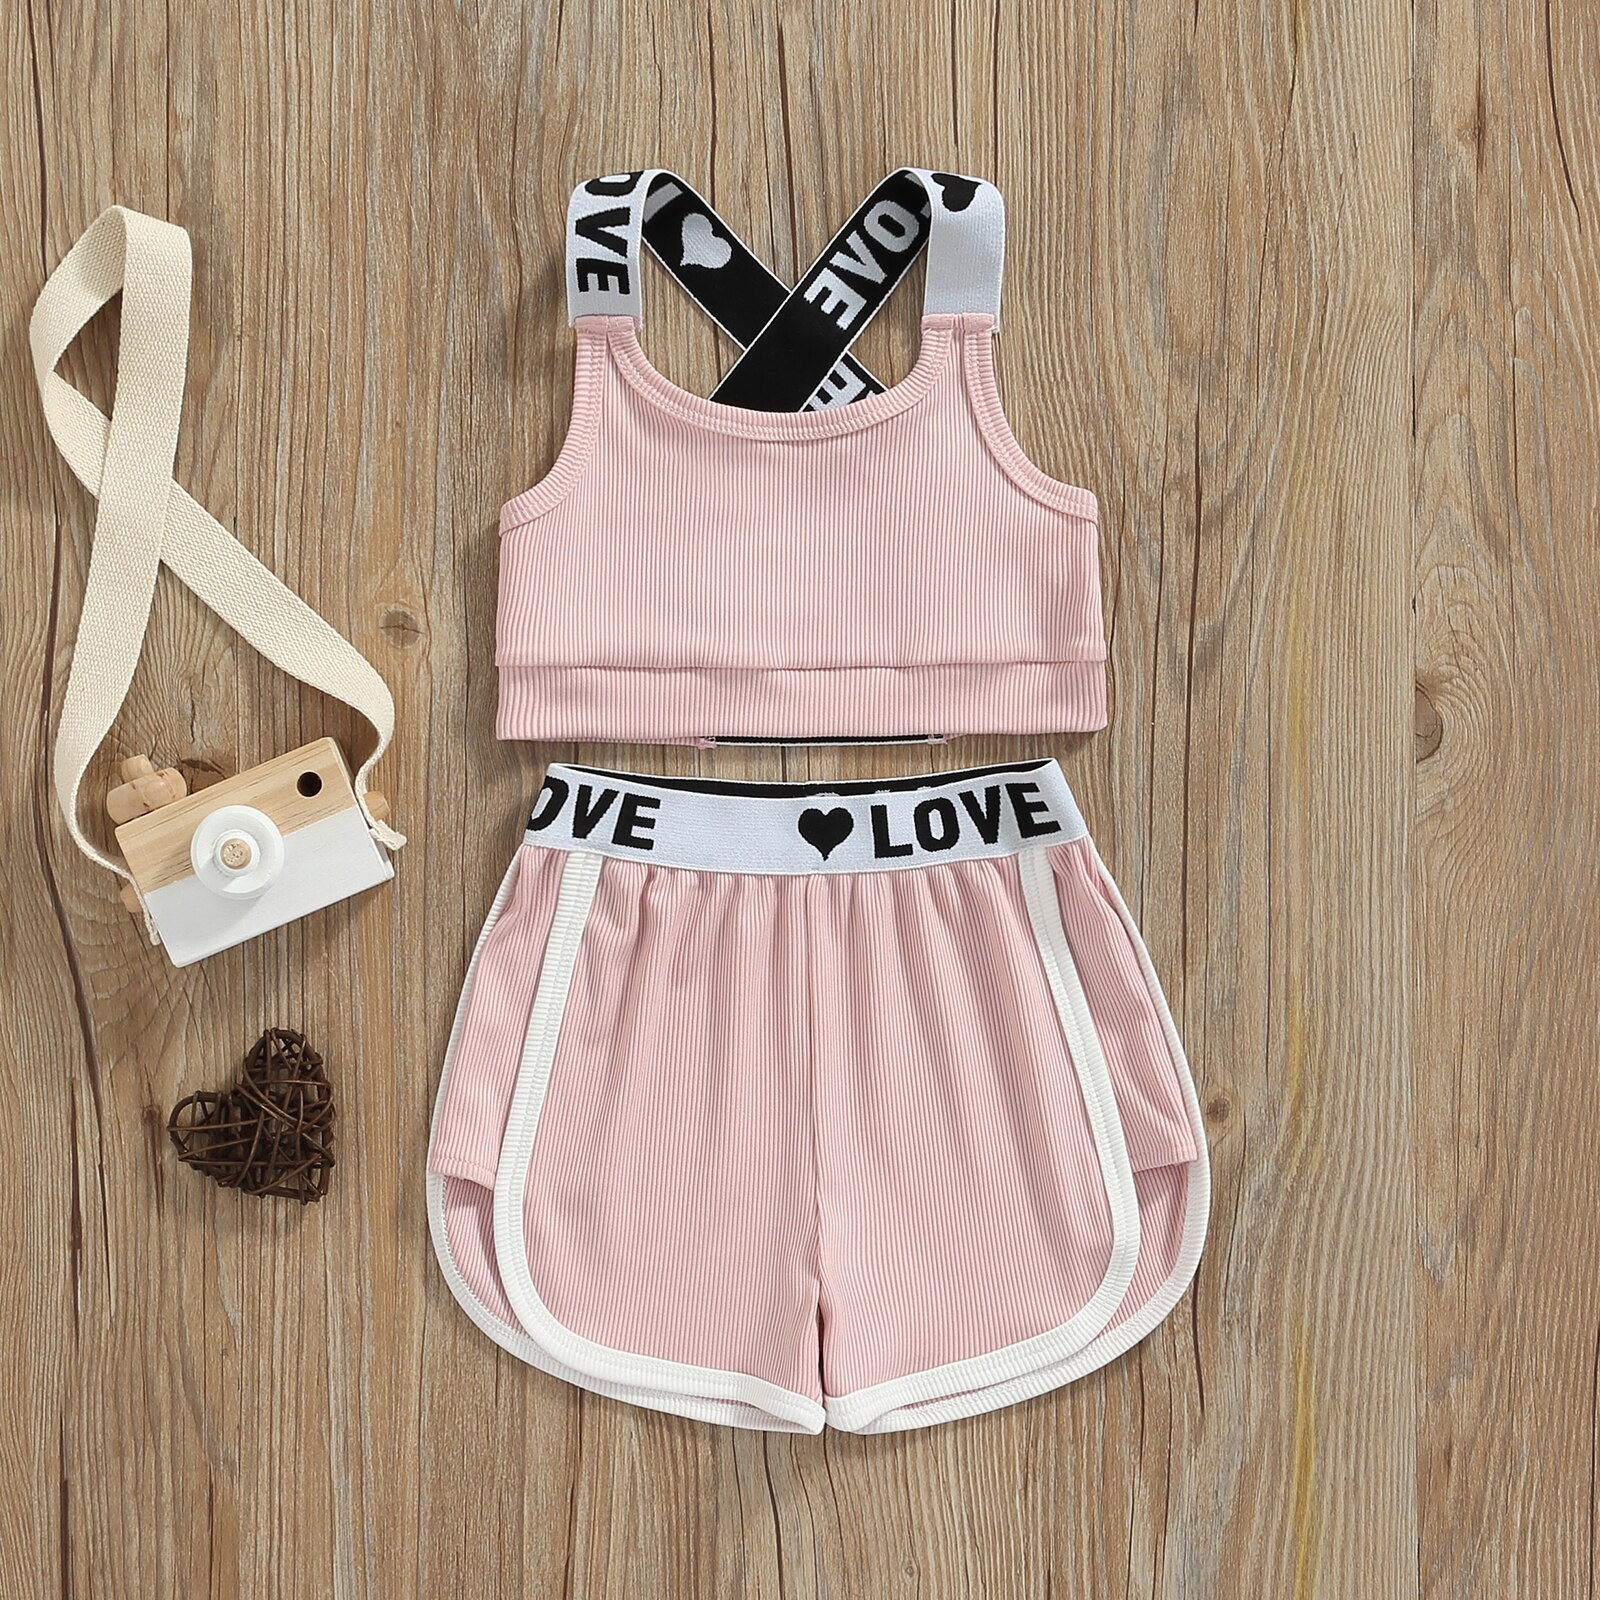 Fashion-Baby-Clothes-Set-Summer-Letter-Strap-Tank-Tops-Shorts-For-Girls-Set-Toddlers-2-Pieces-1